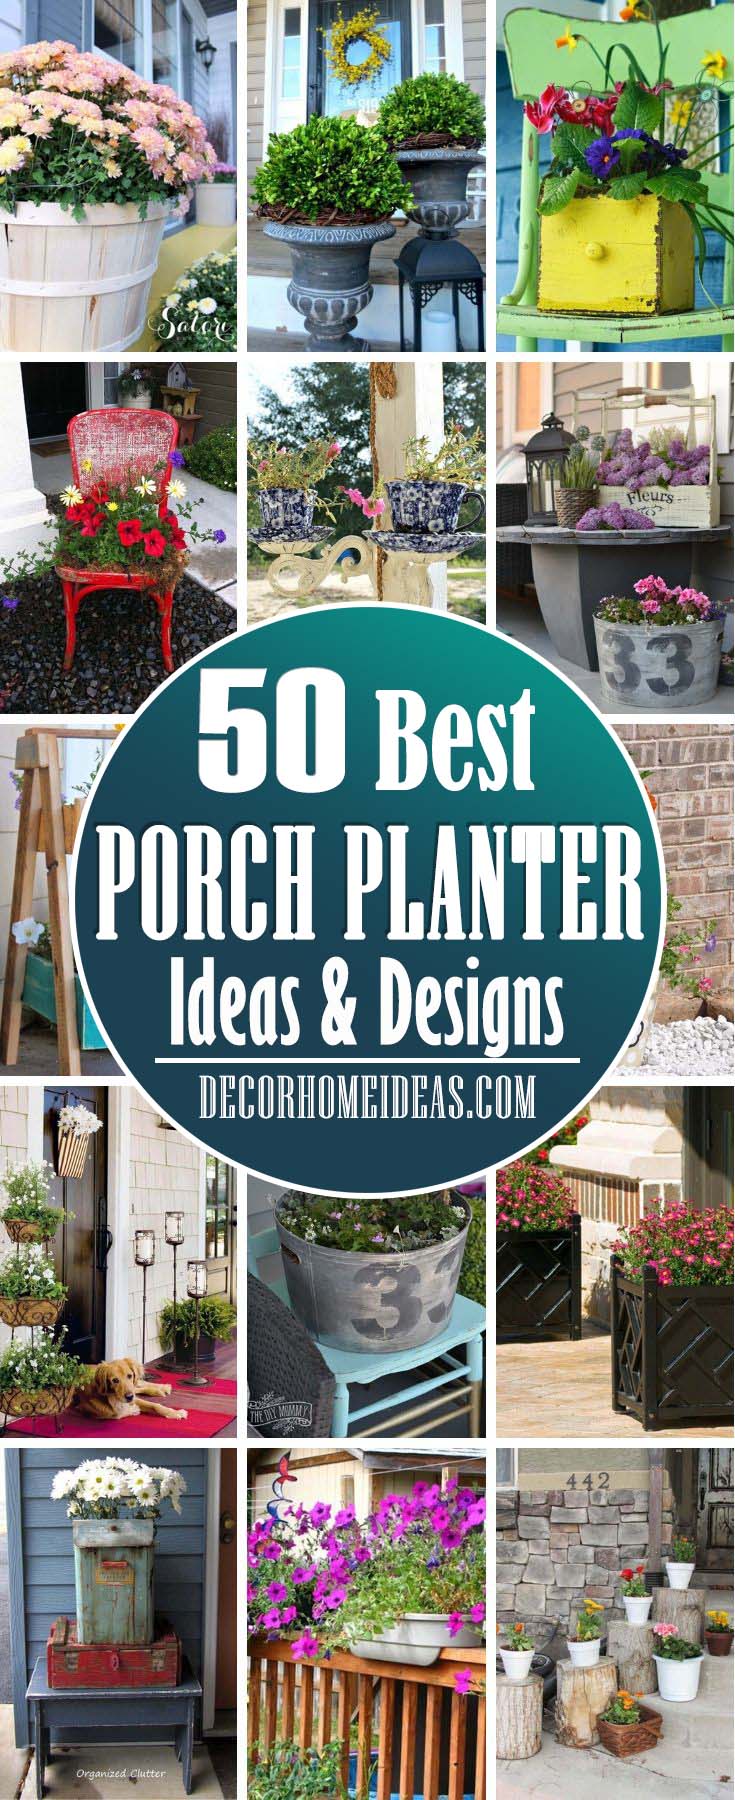  Charming Porch Planter Ideas To Boost Your Curb Appeal Decor Home Ideas - Porch Potted Plant Ideas